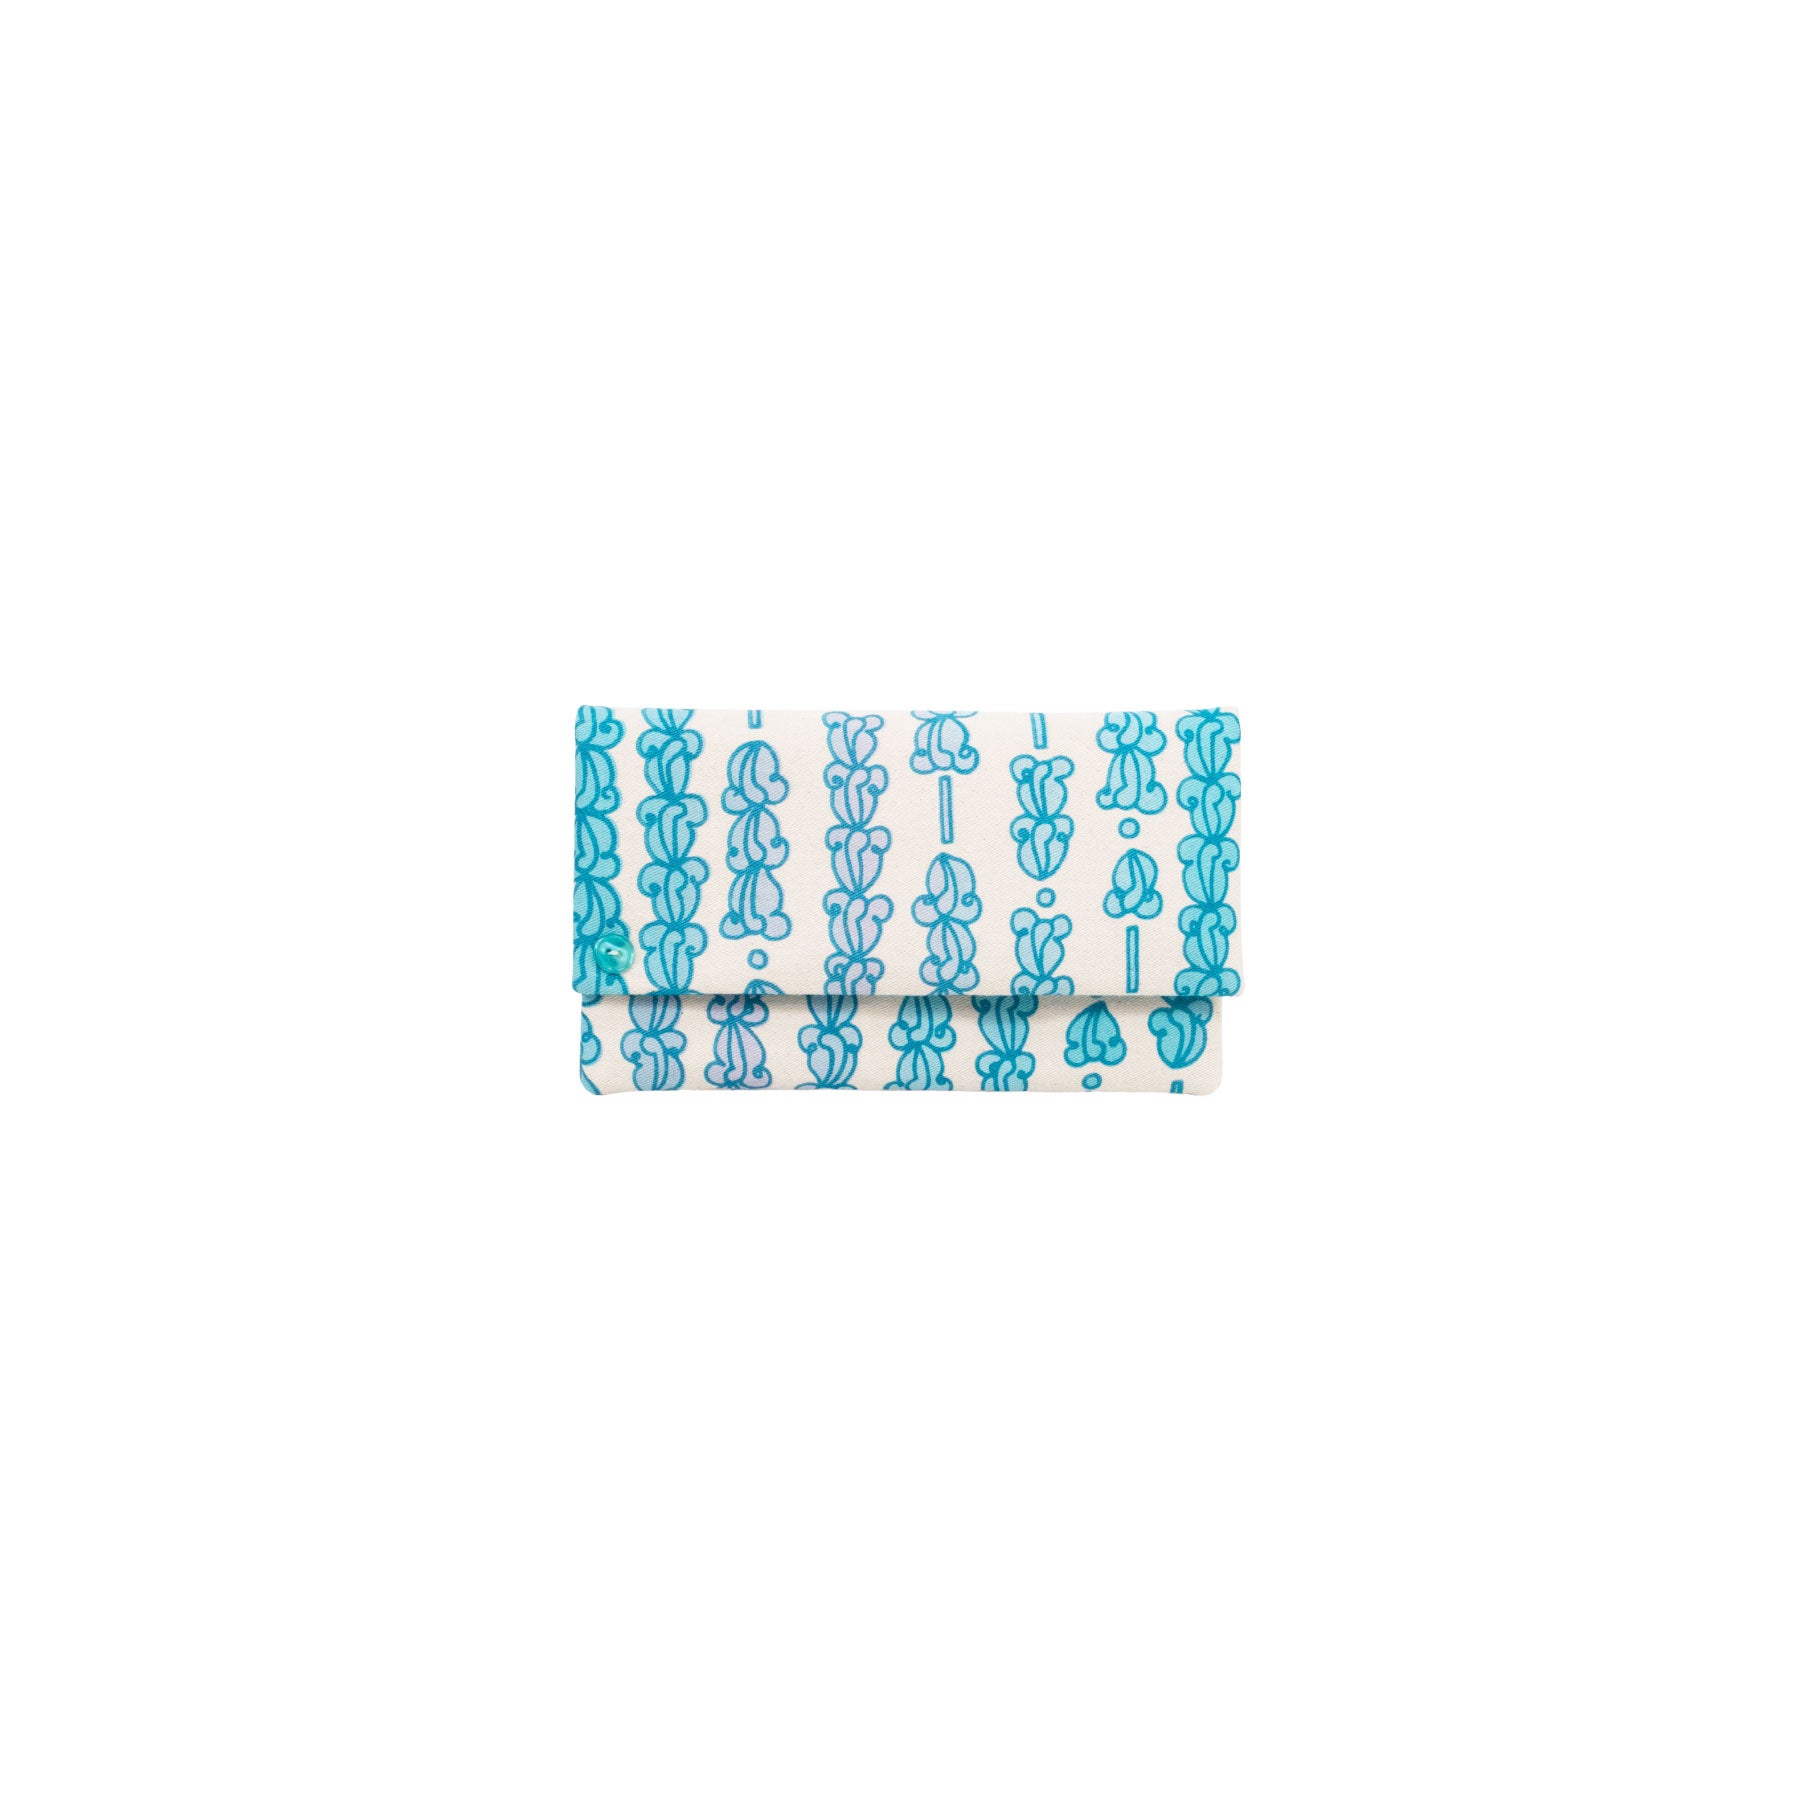 Classic Envelope Clutch • Crown Flower • Peacock Blue over Teal and Lavender Ombre